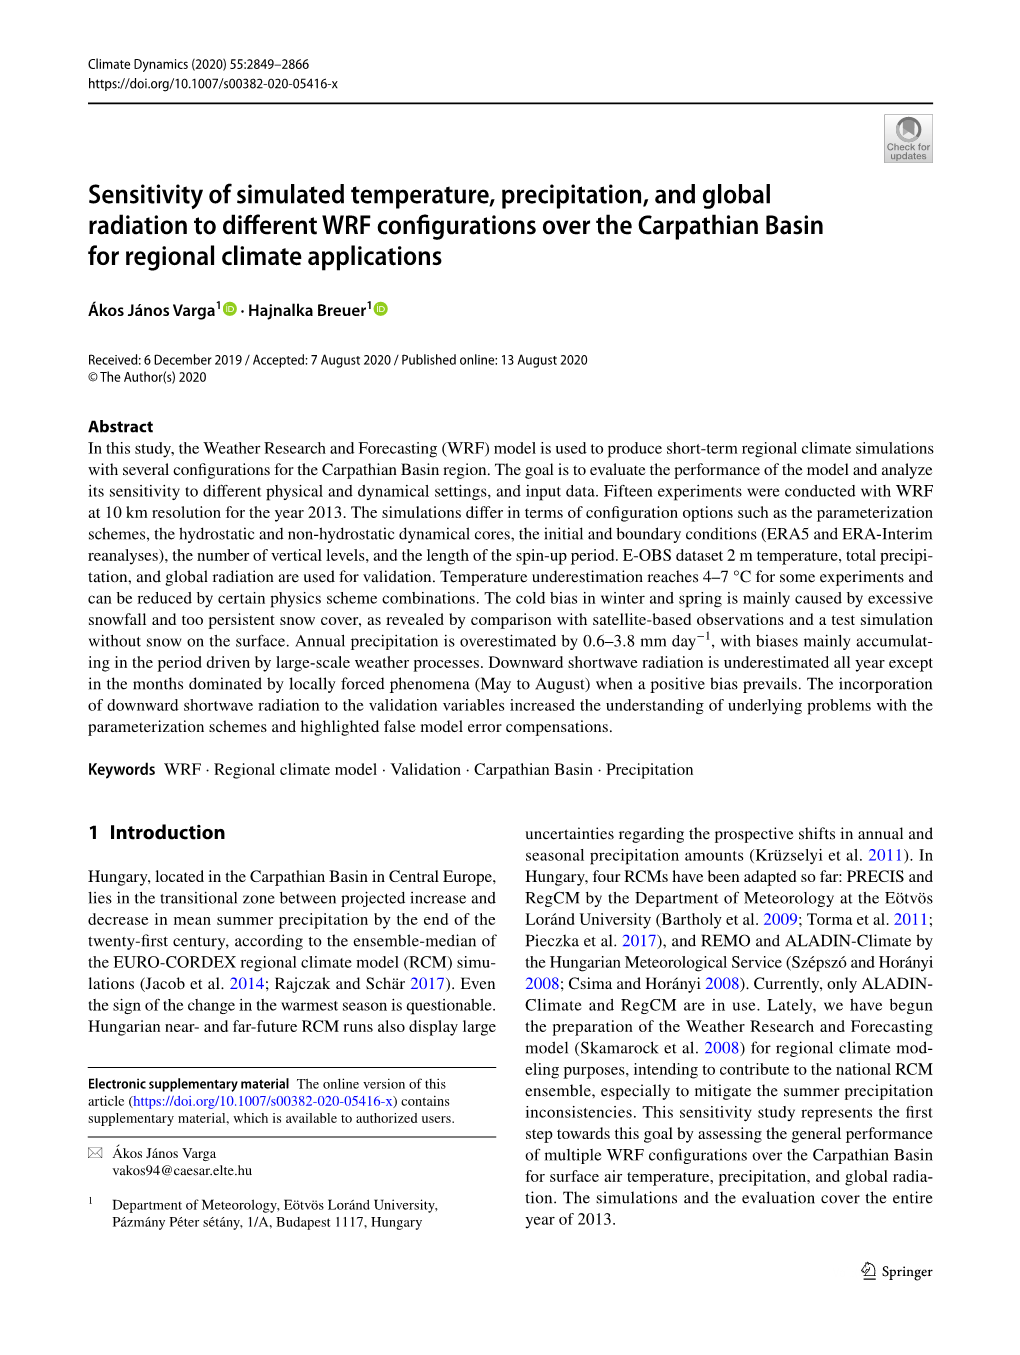 Sensitivity of Simulated Temperature, Precipitation, and Global Radiation to Diferent WRF Confgurations Over the Carpathian Basin for Regional Climate Applications